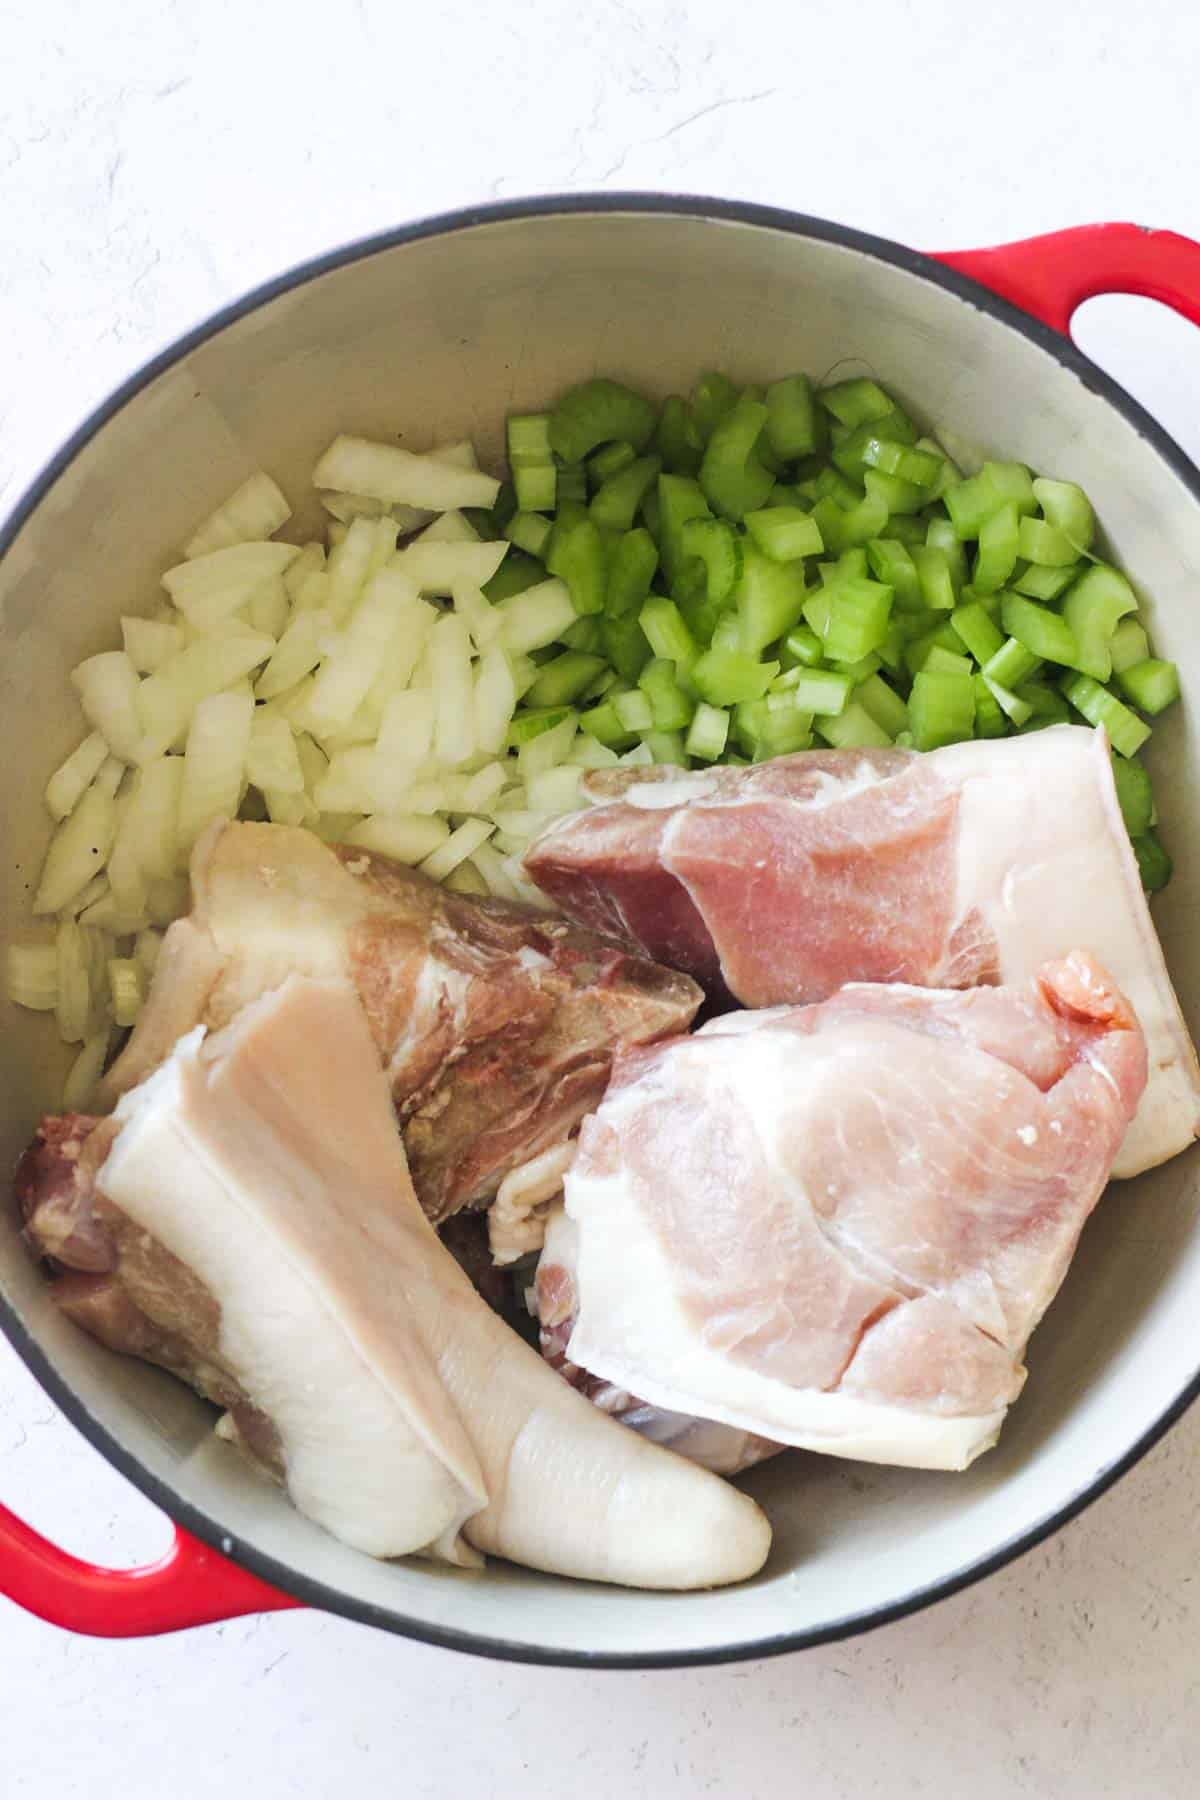 chopped celery, onions and sliced pork in the pot